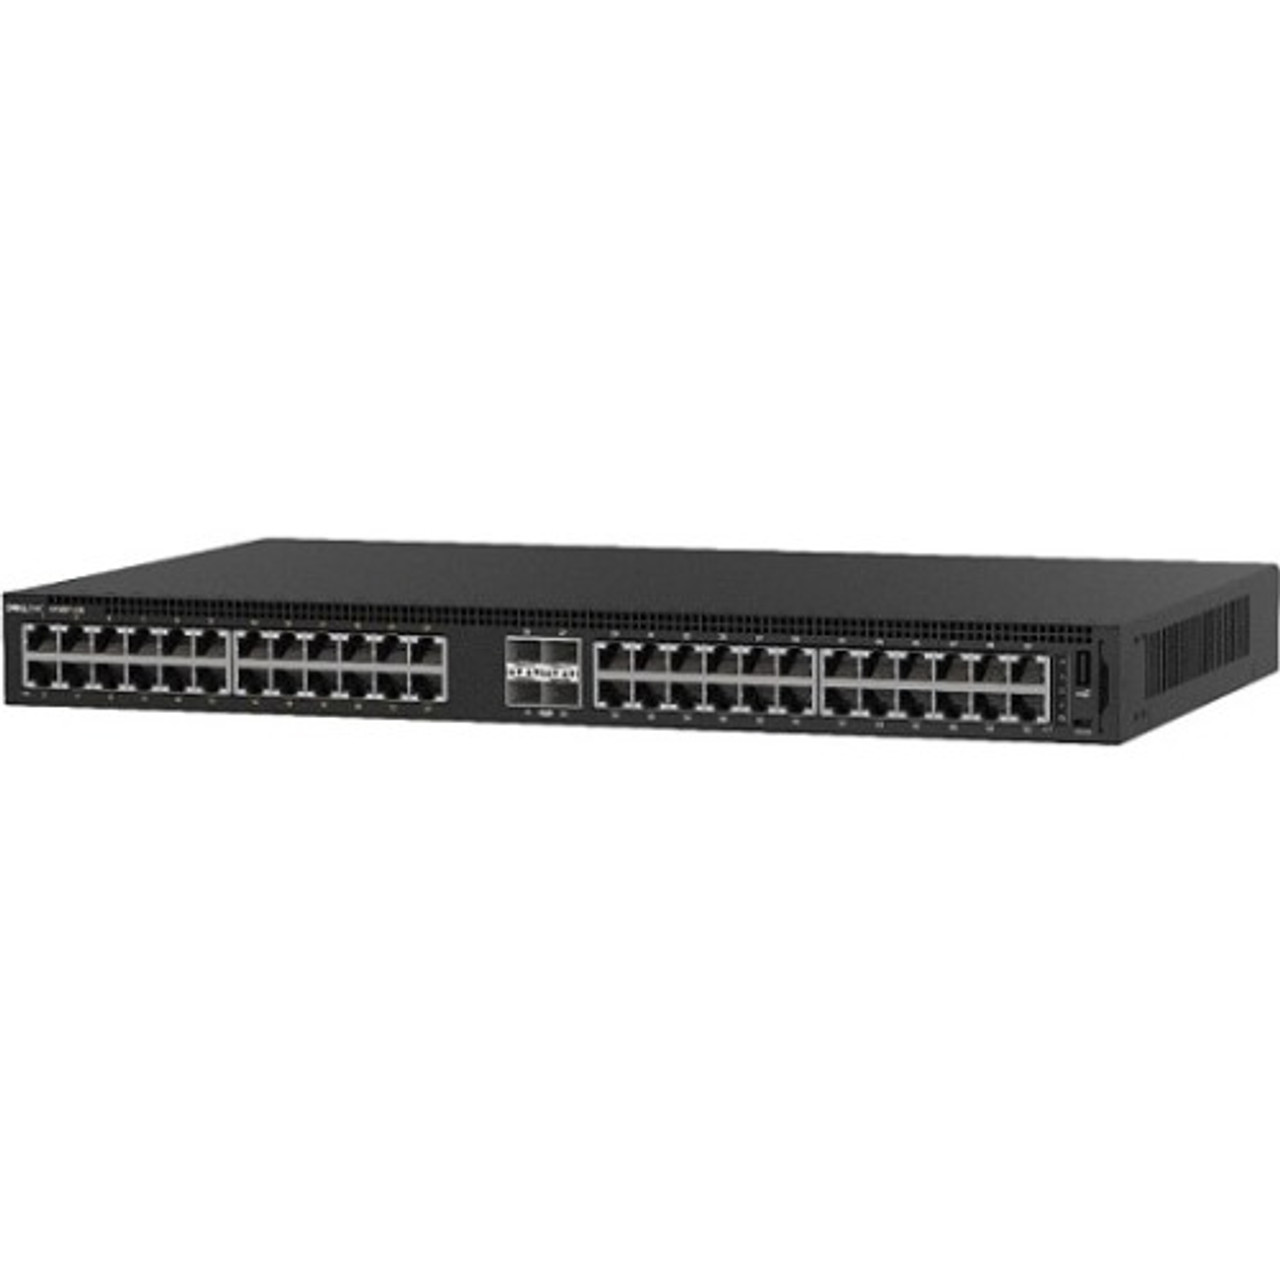 F0TCG Dell EMC Networking N1148P-ON Switch 48 x Gigabit Ethernet Network, 4 x 10 Gigabit Ethernet Expansion Slot Manageable Twisted Pair, Optical Fiber